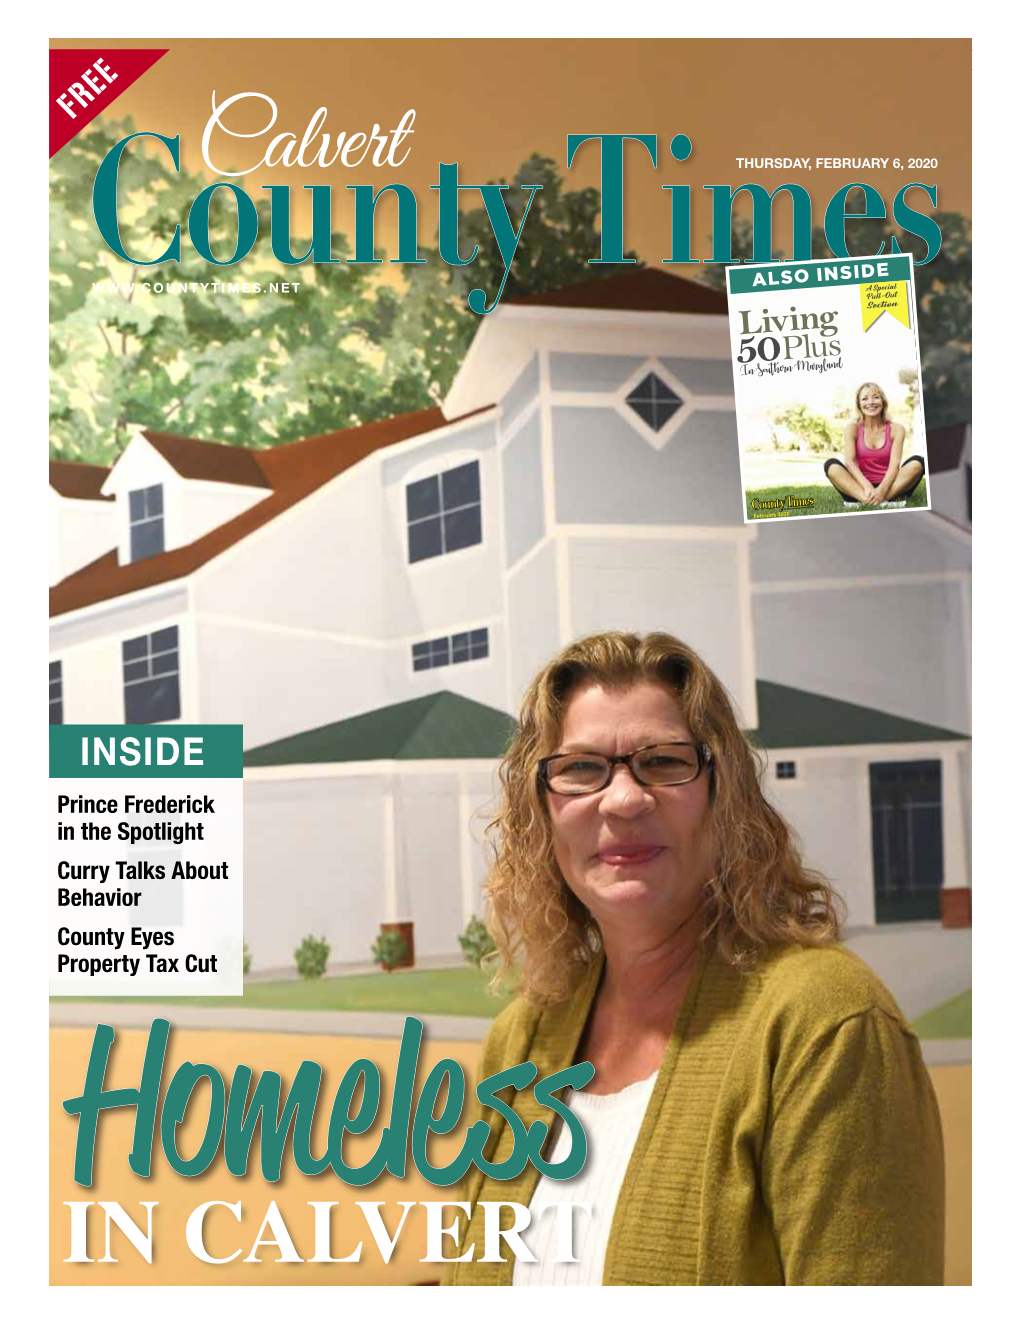 IN CALVERT 2 the Calvert County Times Thursday, February 6, 2020 on the COVER LORI HONY IS HEAD of ECHO HOUSE, CALVERT CONTENTS COUNTY’S HOMELESS SHELTER